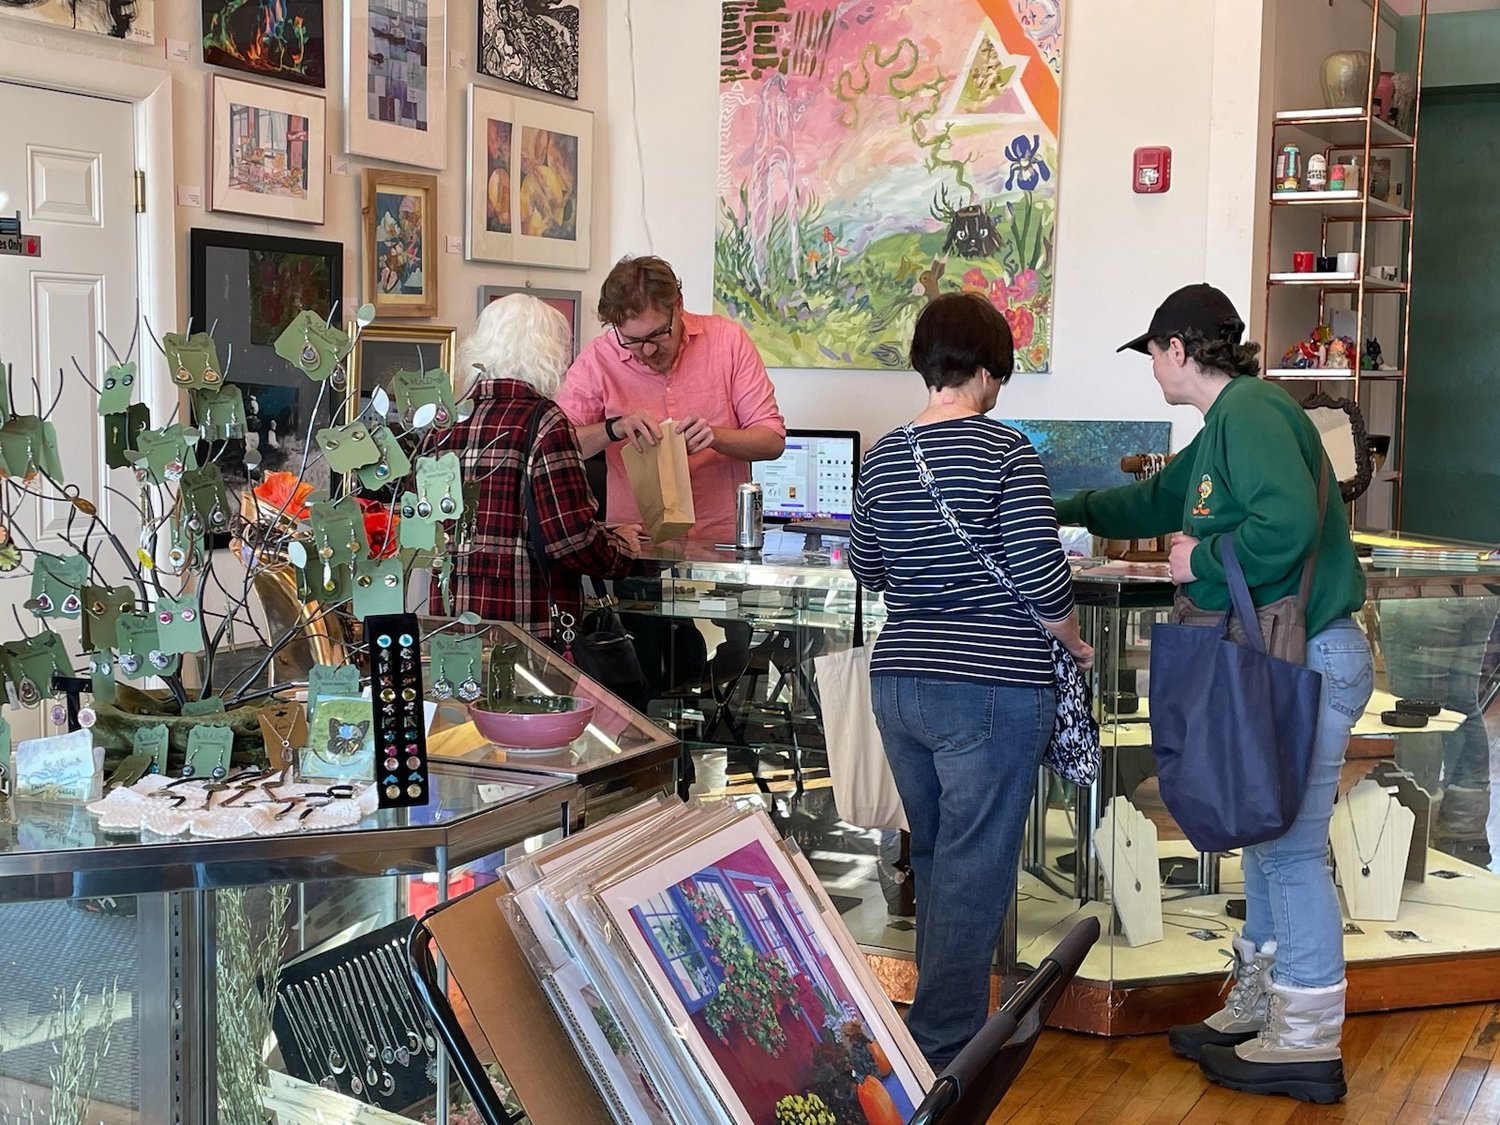 Adam Prescott Chrisman, owner of The Copper Easel, waits on some customers during the Small Business Saturday event in Rome's Downtown Arts District.